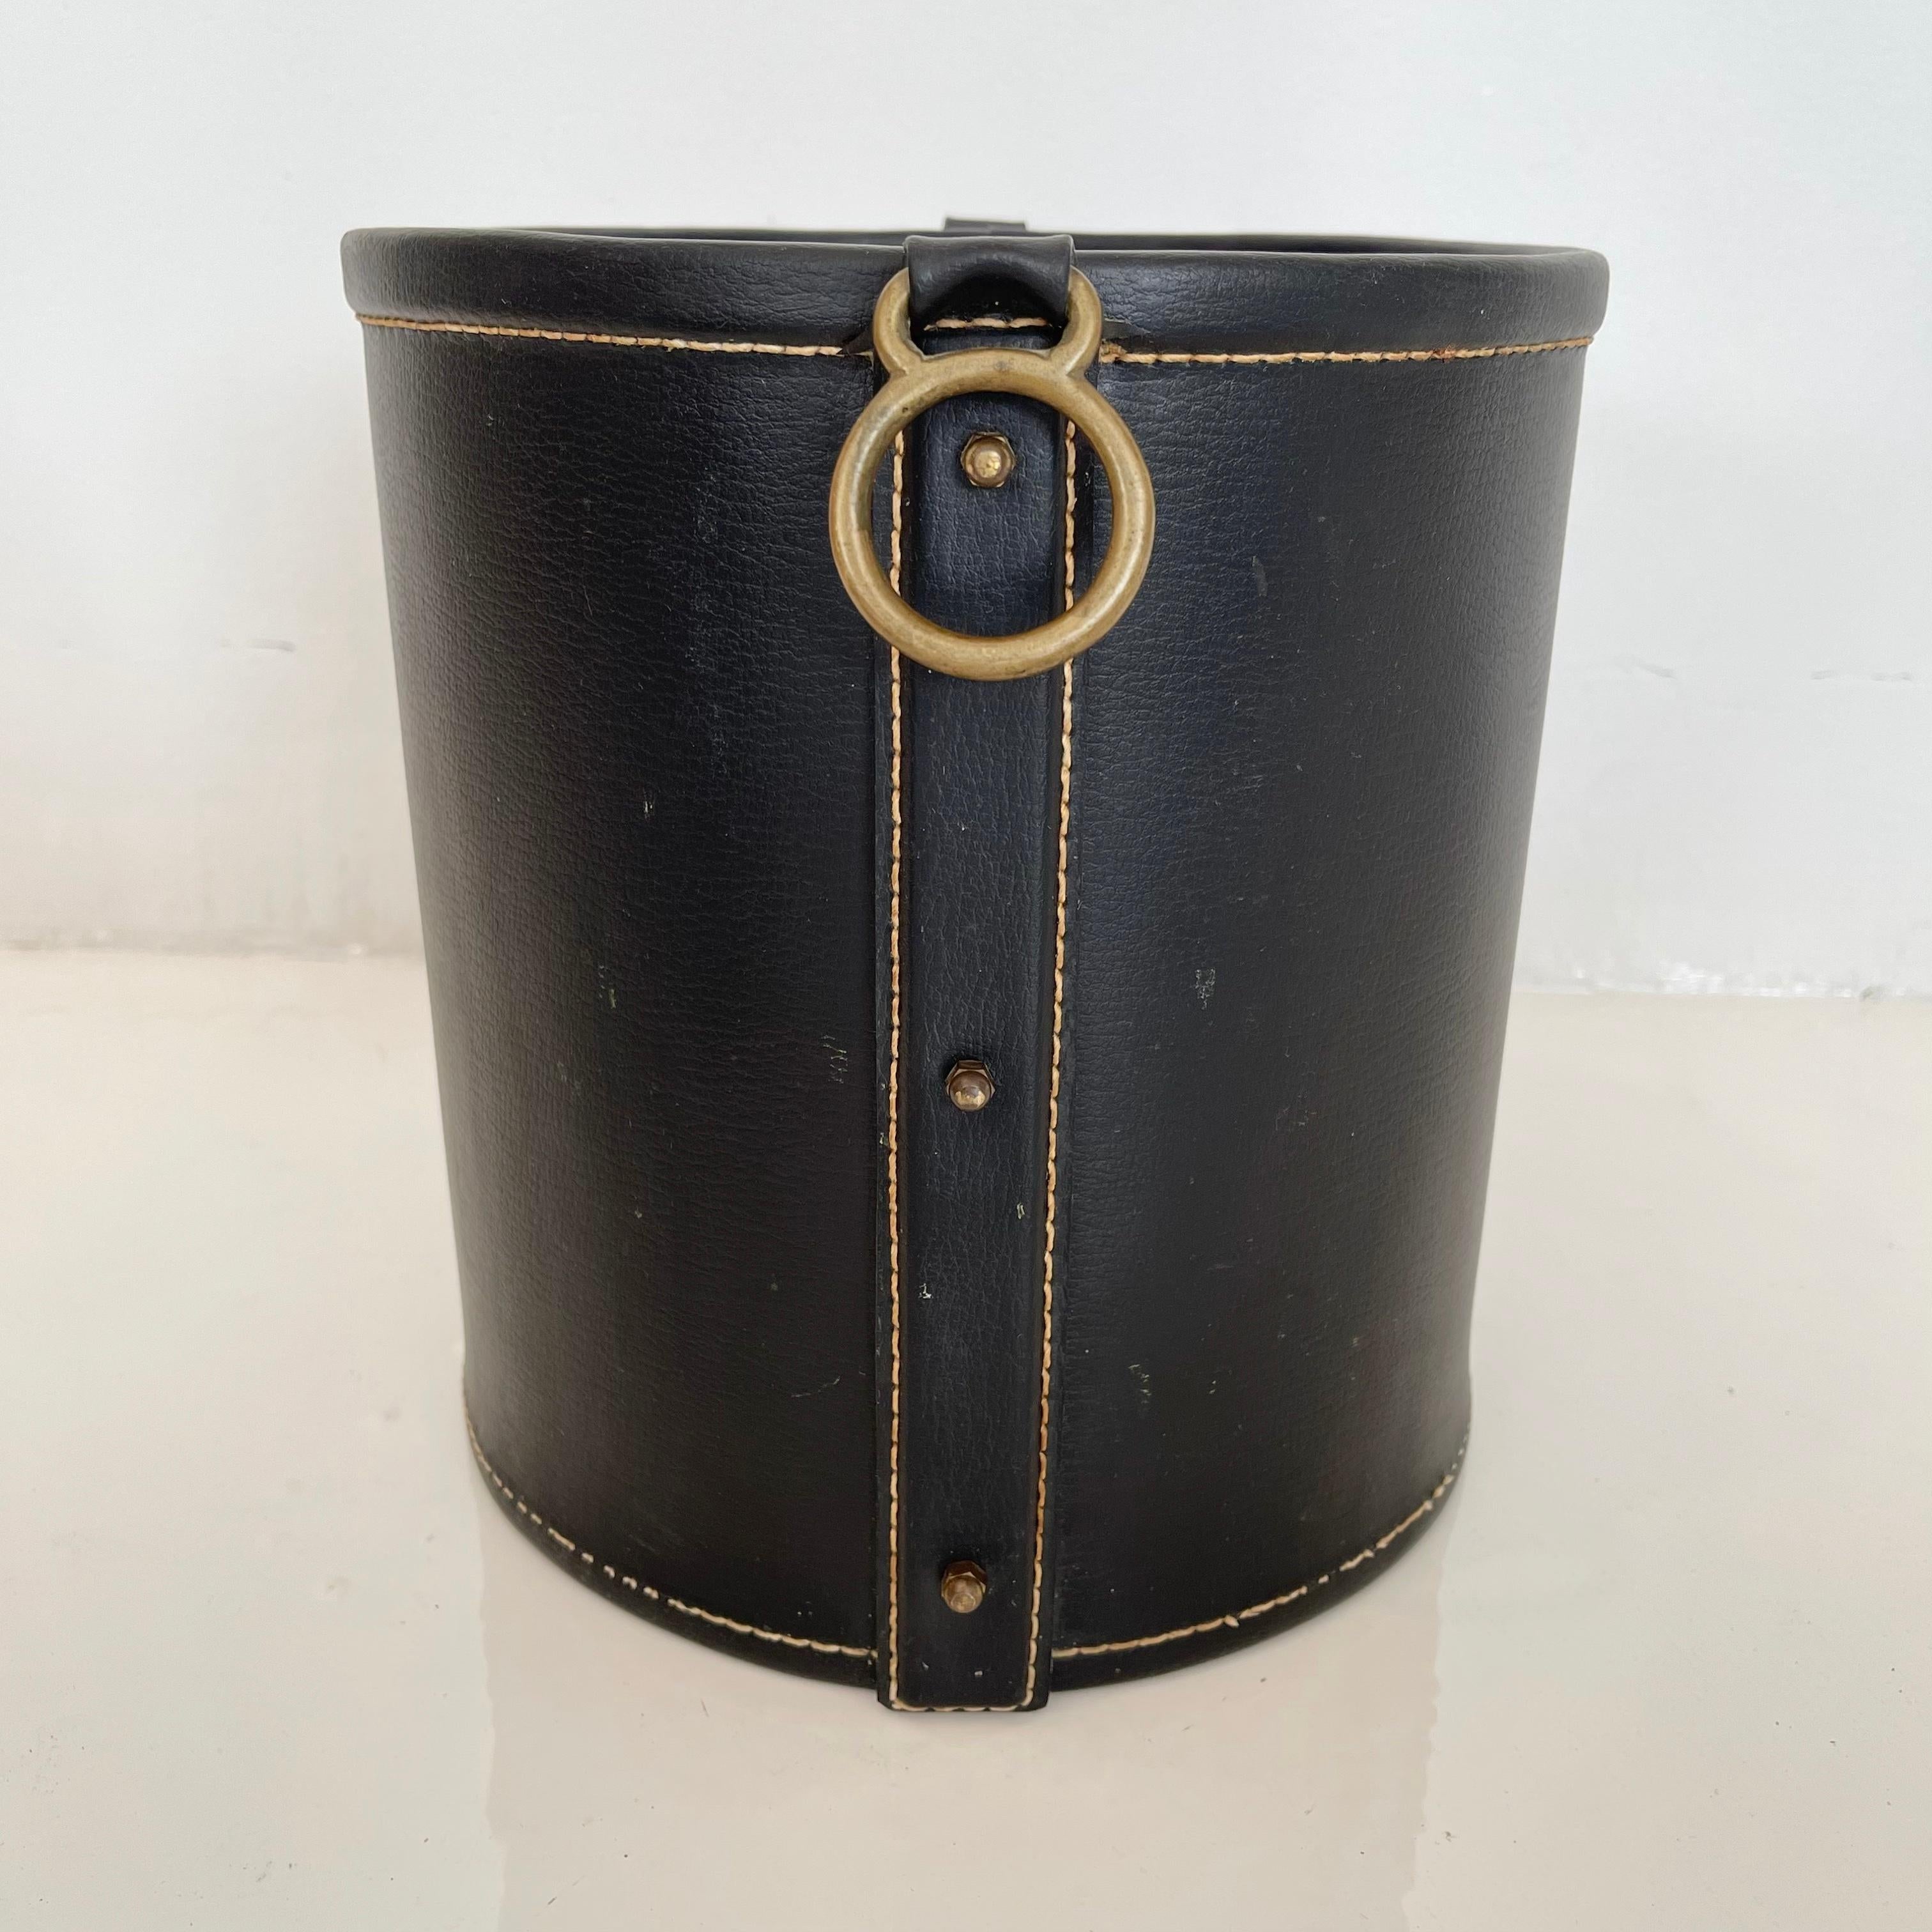 Handsome leather and brass waste basket by French designer Jacques Adnet. Excellent condition and patina to leather and brass. Wood bottom. Very sturdy. Great lines. Collectible piece of Adnet design.